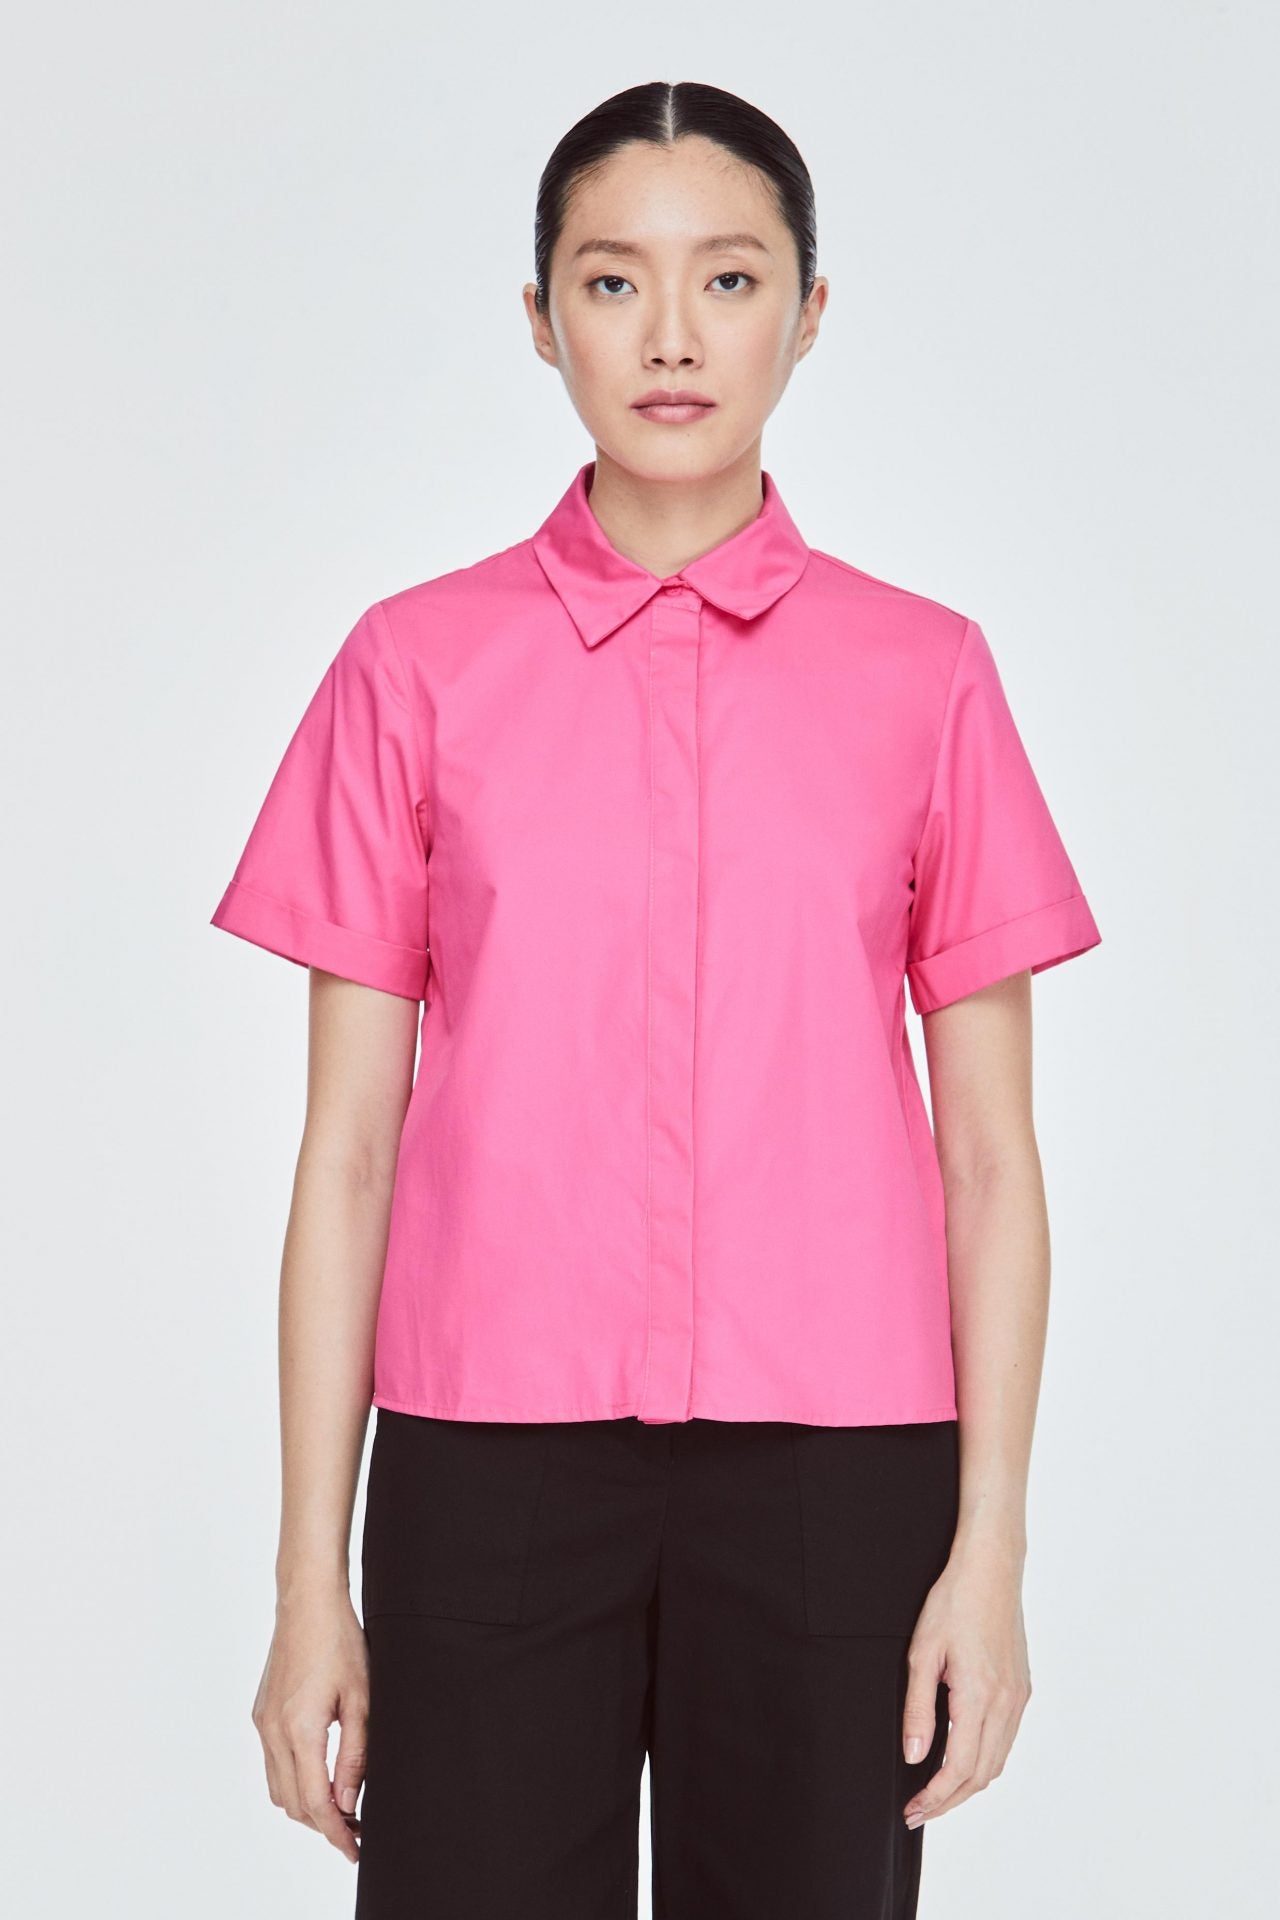 BB 11215 COLLARED BUTTON DOWN HOT PINK